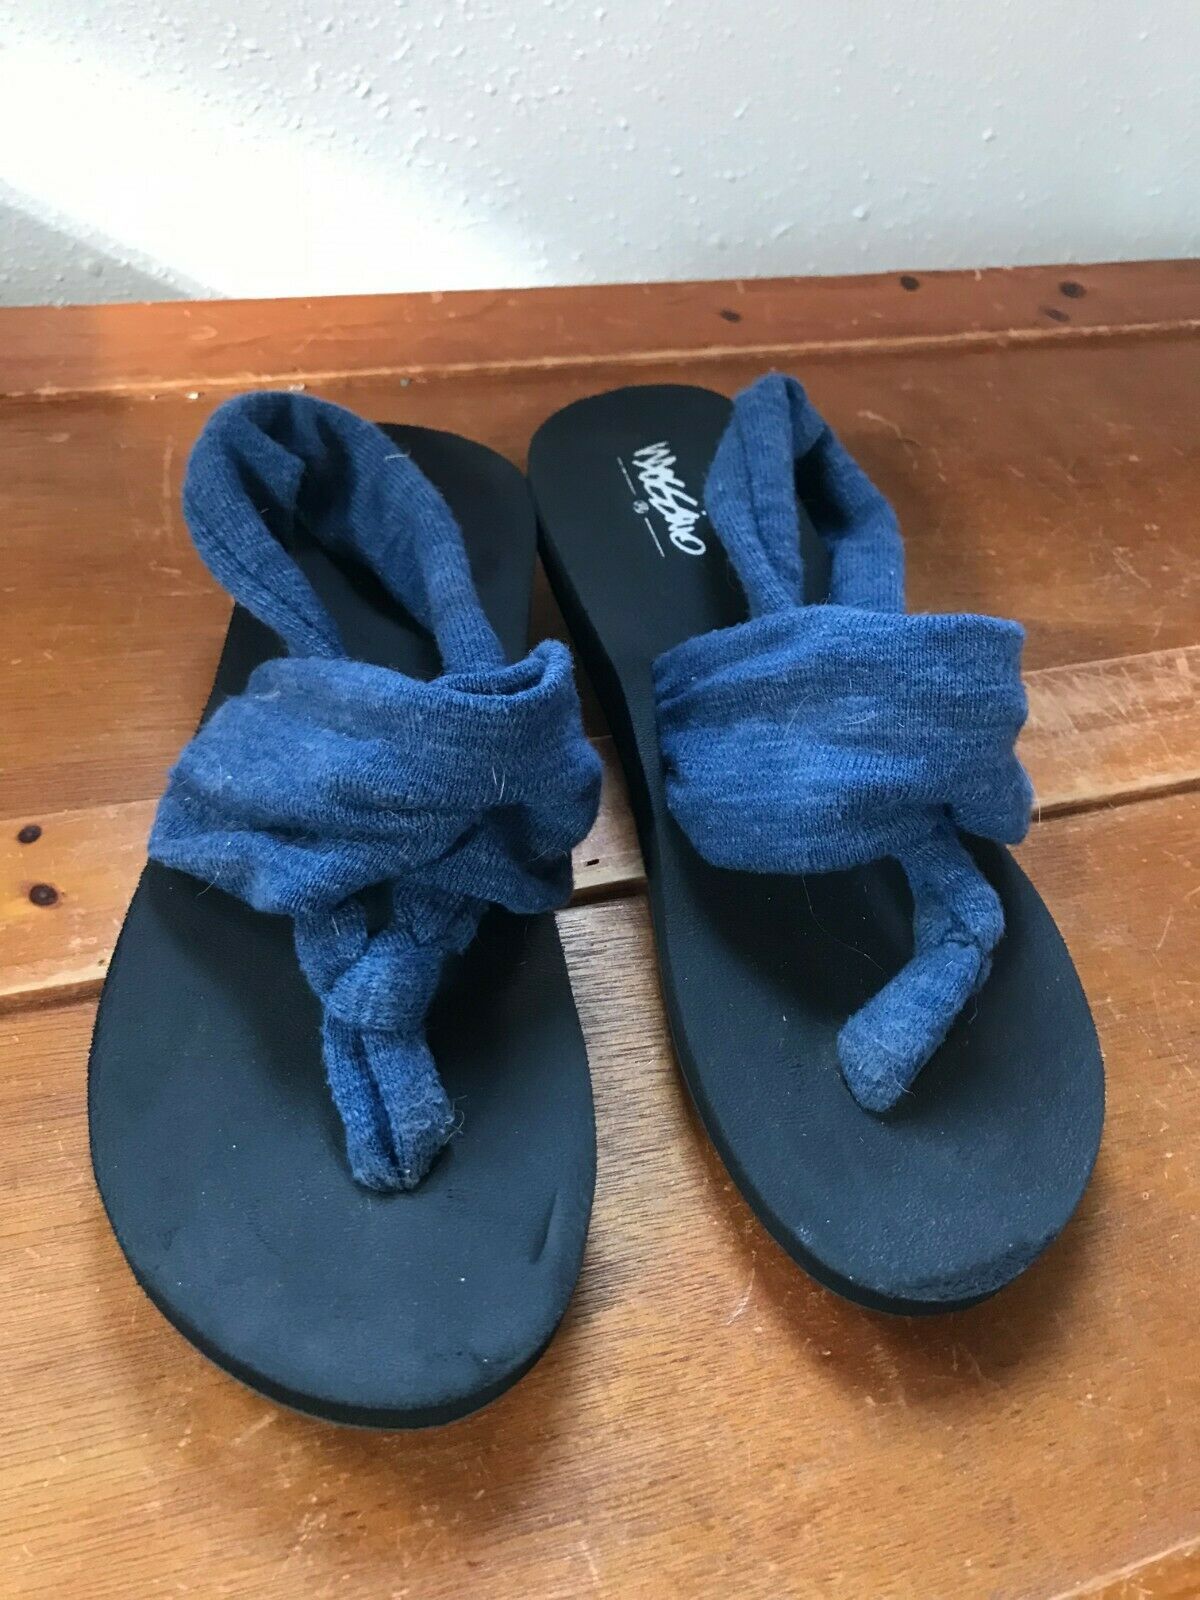 Gently Used Mossimo Stretchy Denim Blue Fabric Sandals with Black Rubber Soles  - $8.59